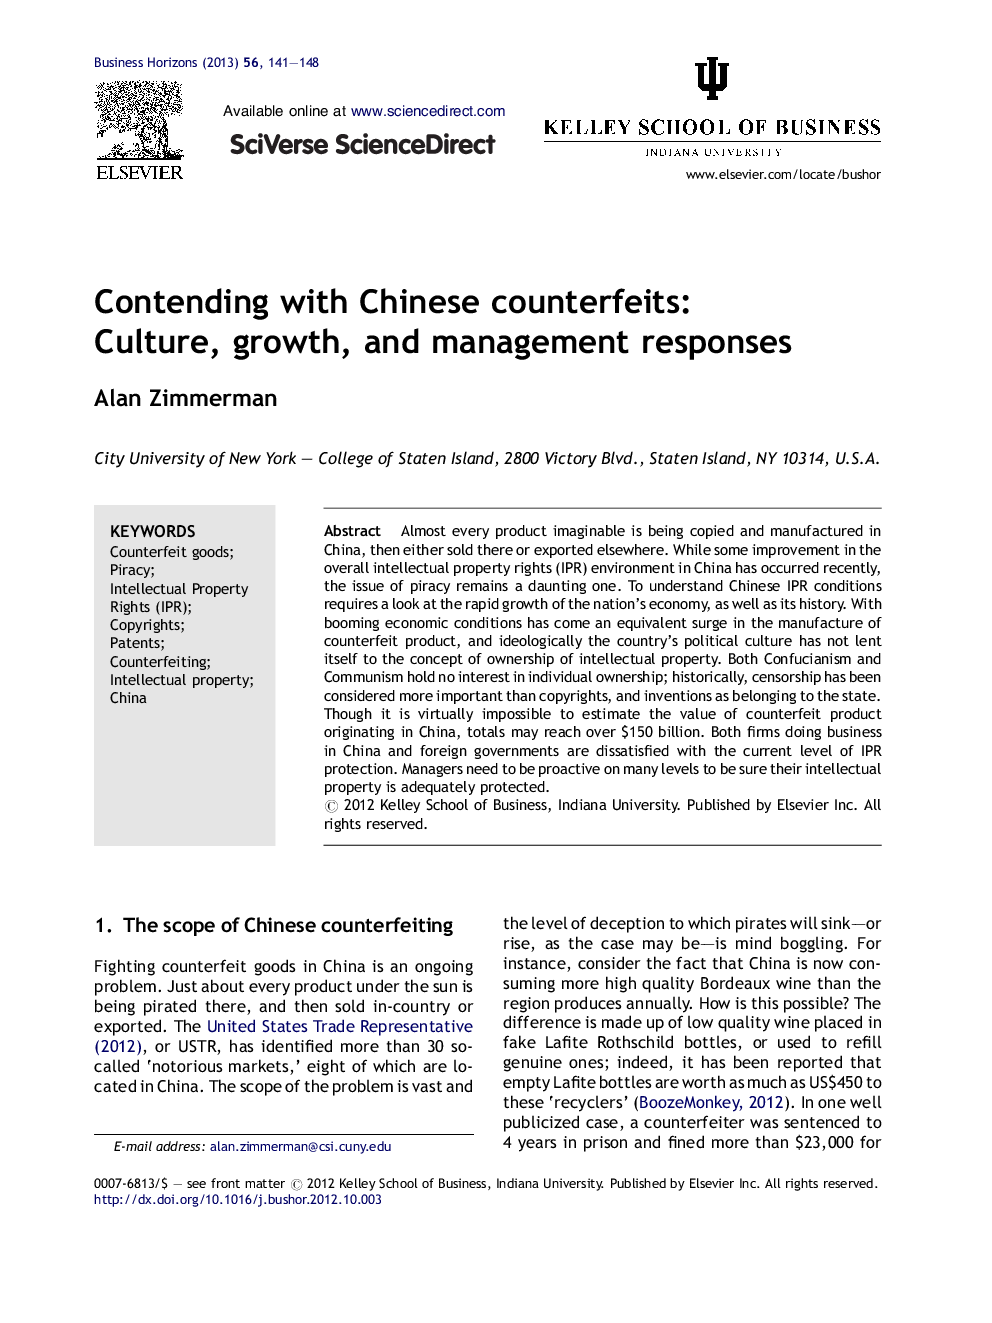 Contending with Chinese counterfeits: Culture, growth, and management responses